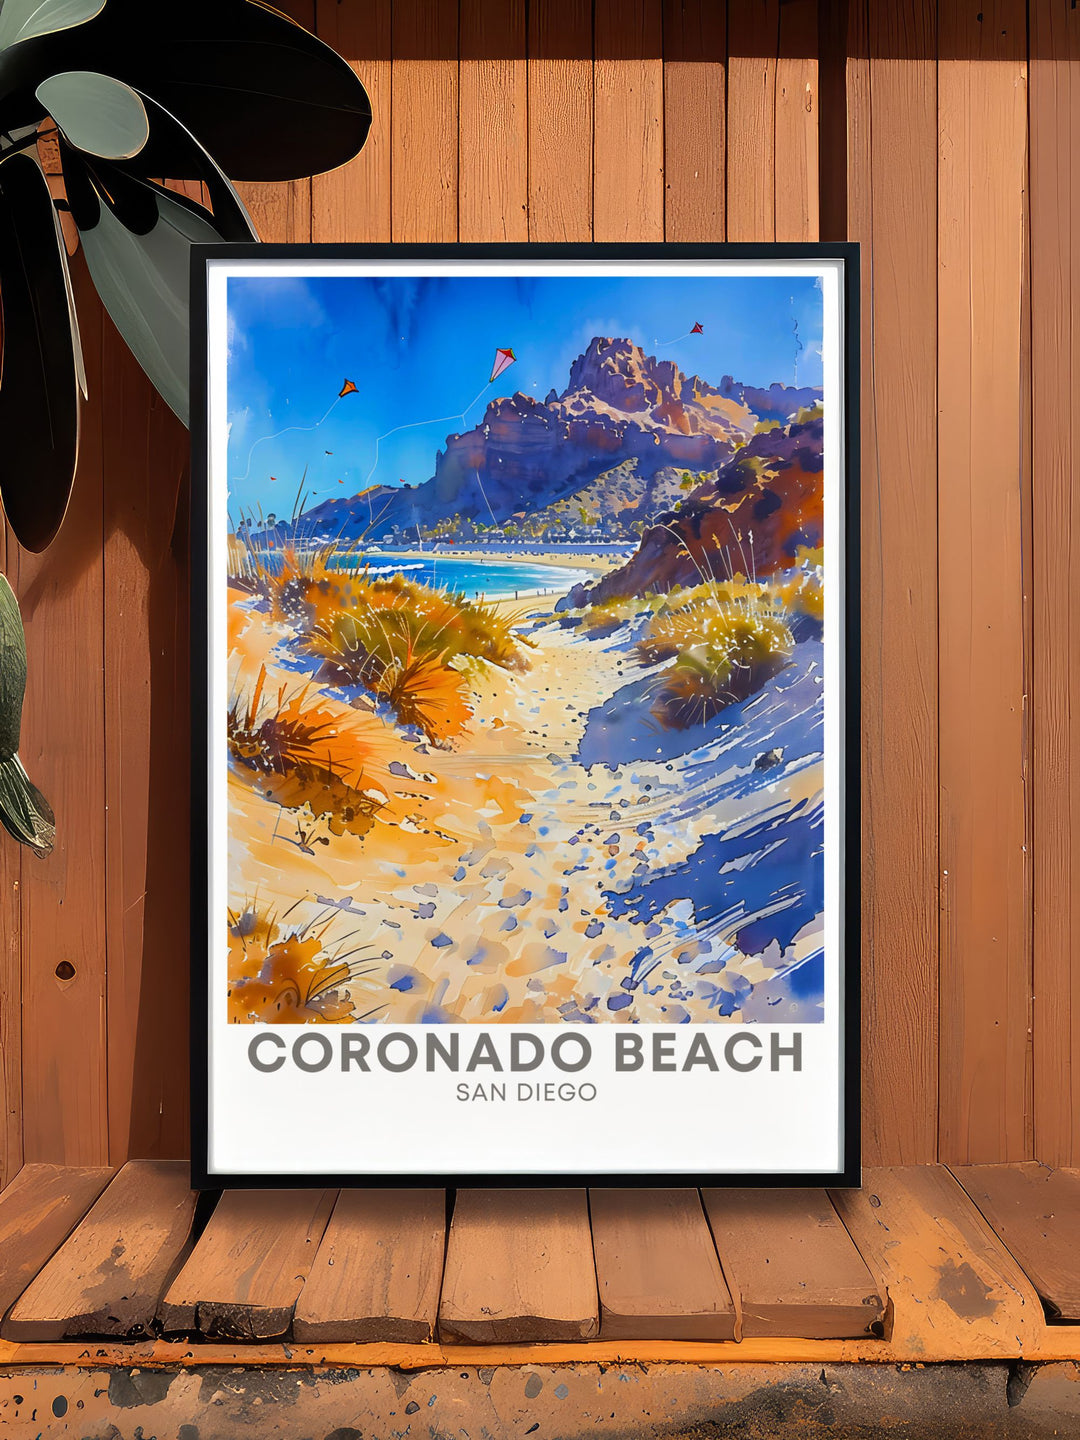 Our Vail Ski Wall Art and Sand Dunes Posters are designed to elevate your home decor. These stunning pieces of Coronado Art capture the excitement of skiing and the tranquil beauty of the Sand Dunes adding a sophisticated touch to any space